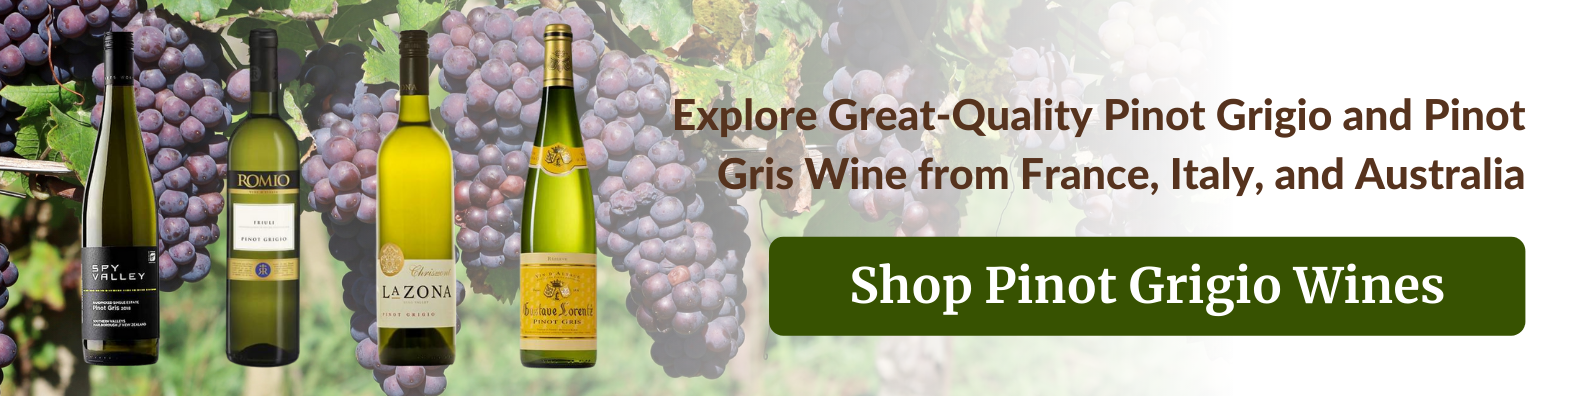 shop pinot grigio and pinot gris wines in the philippines at best prices